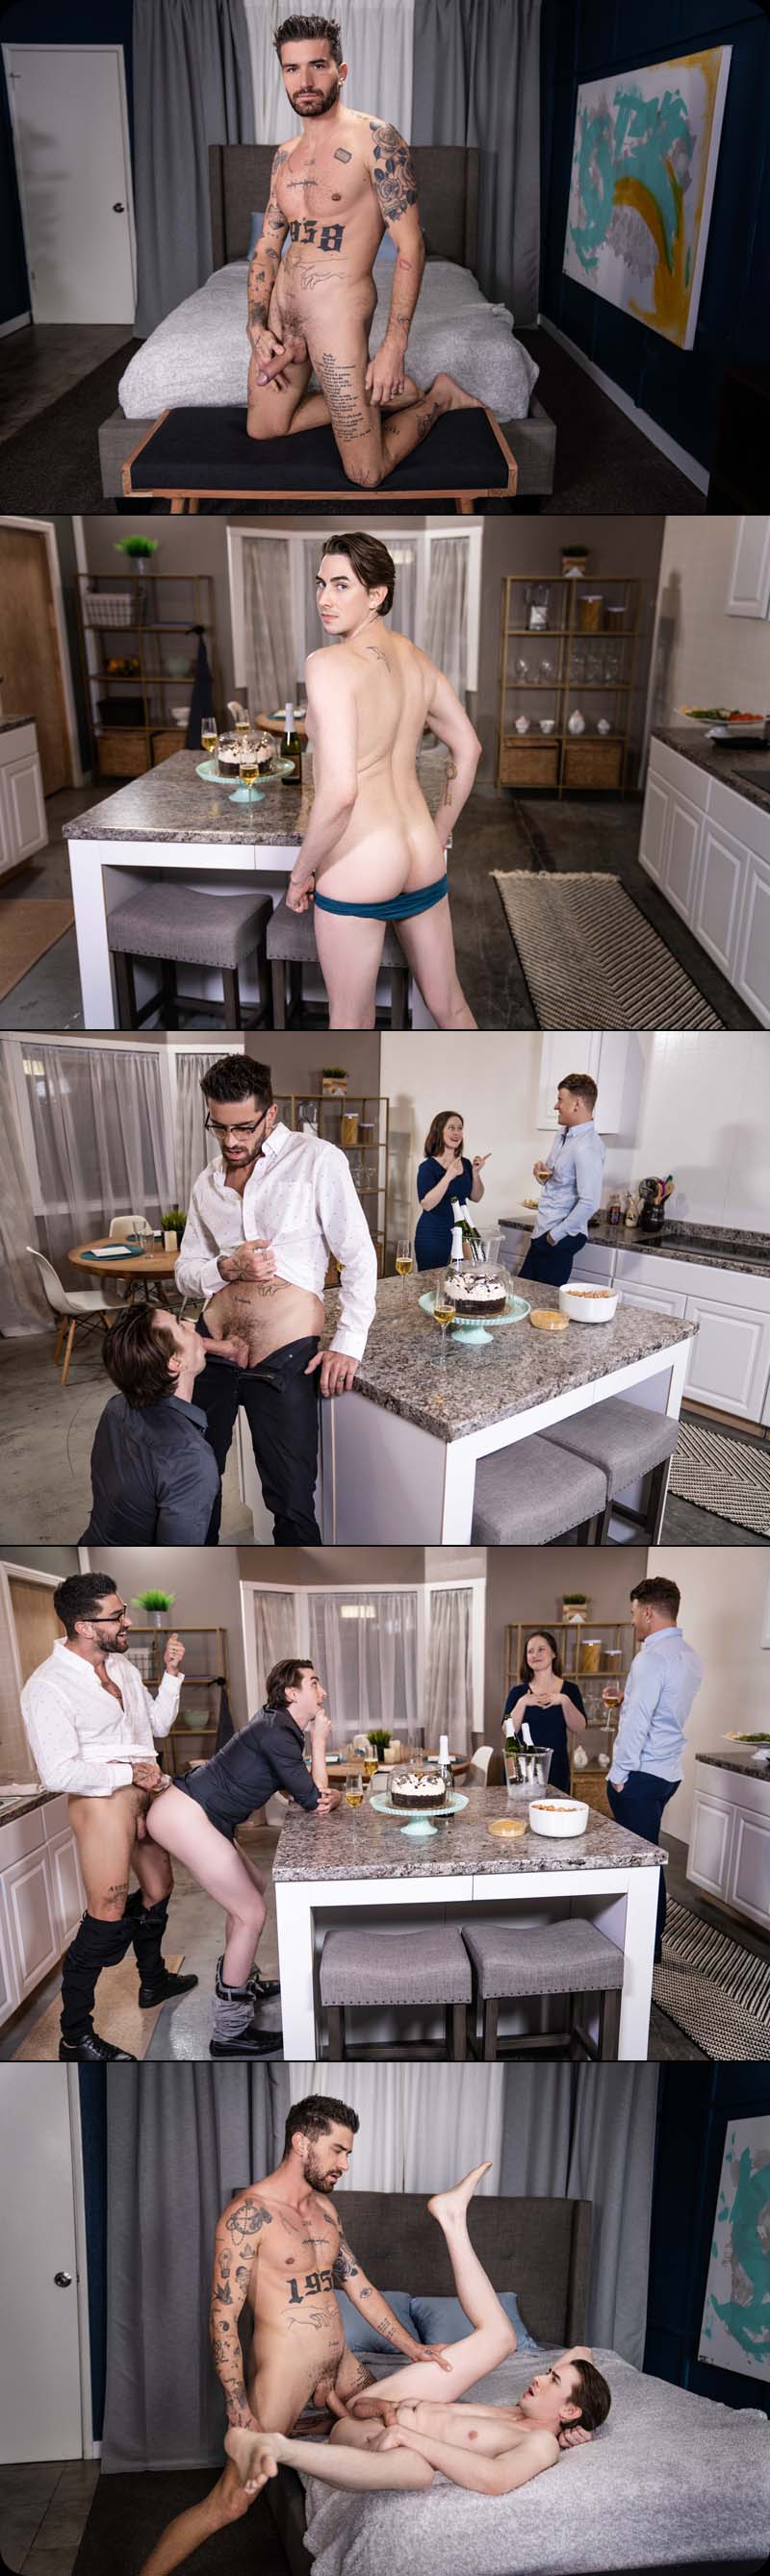 BIG Fuck-Up In The Kitchen! (JJ Knight, Chris Damned and Jack Hunter) at MEN.com